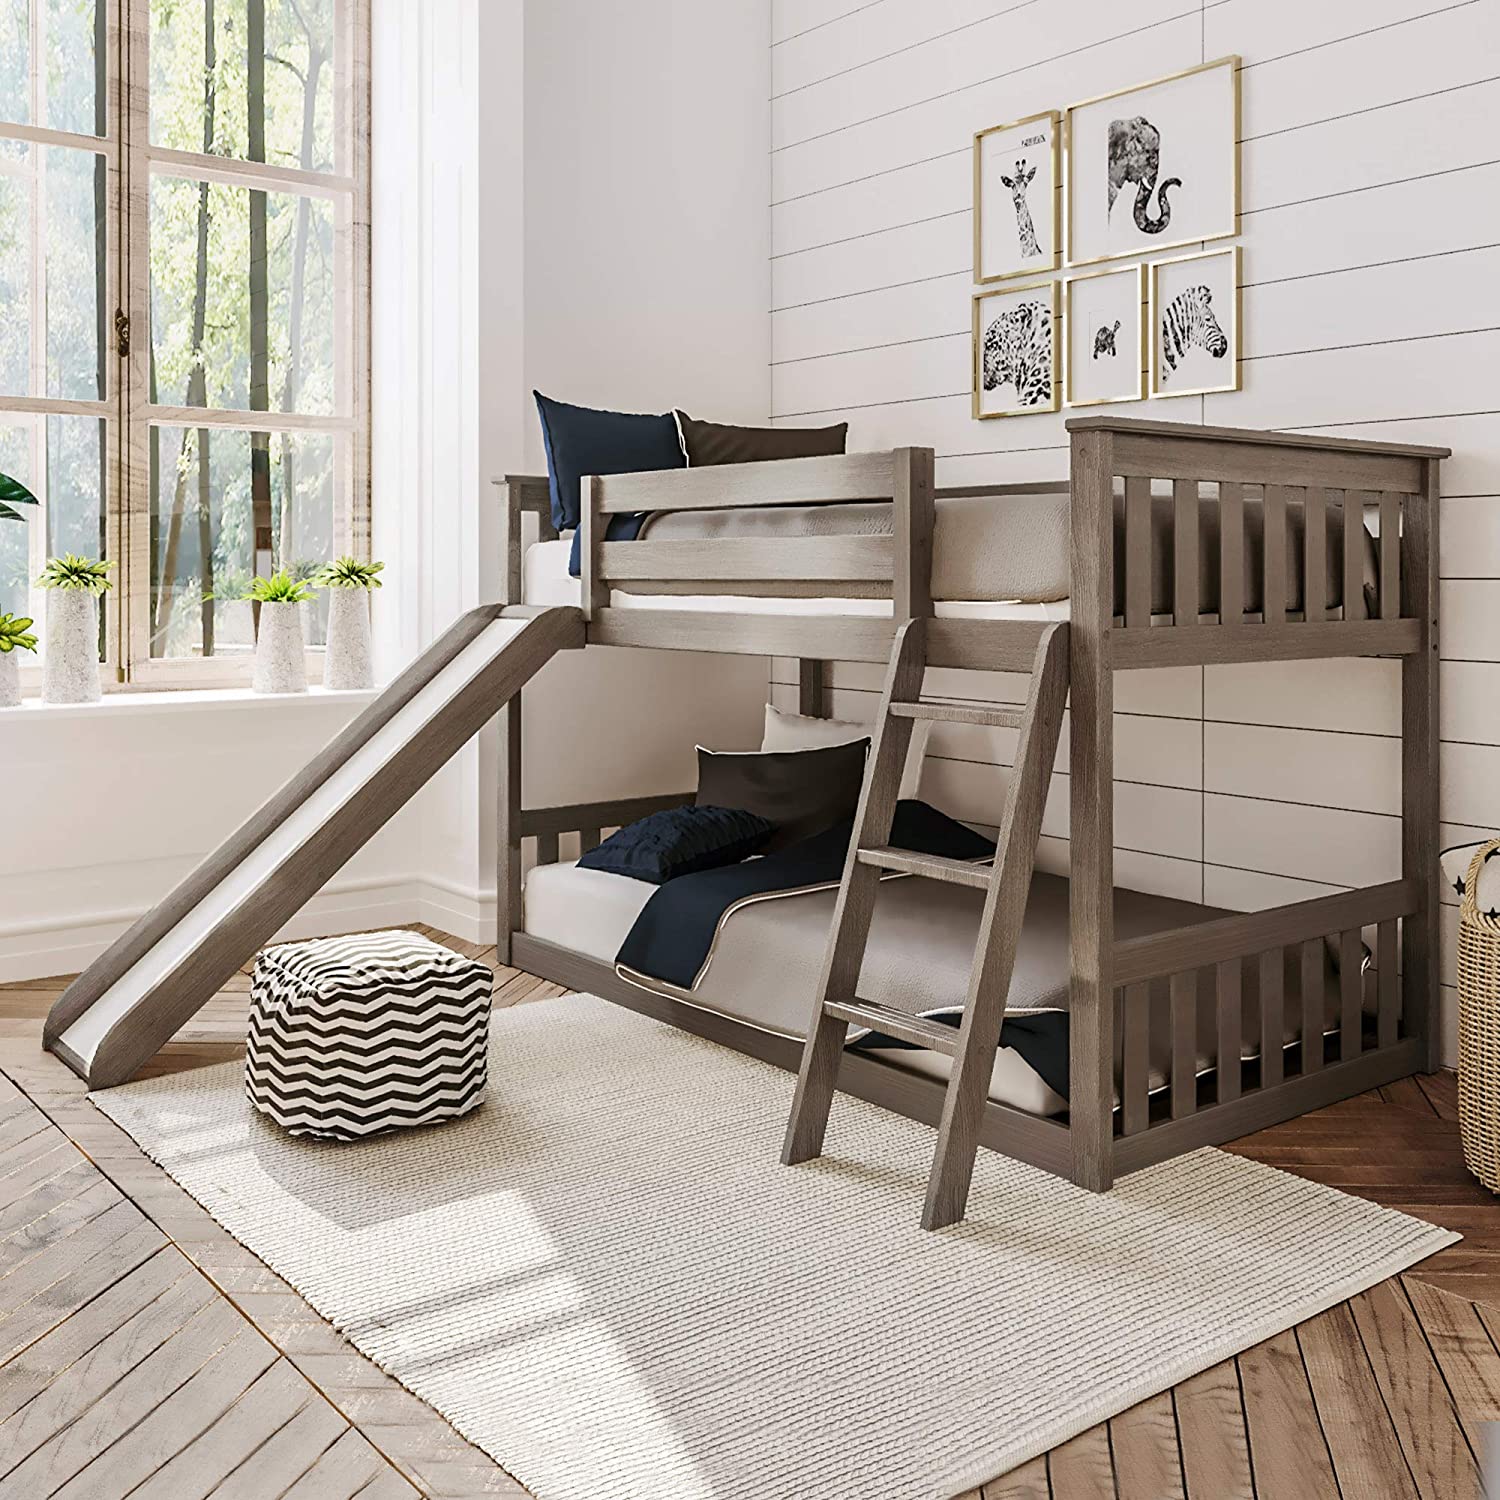 Max & Lily Solid Wood Twin Bunk Bed With Slide